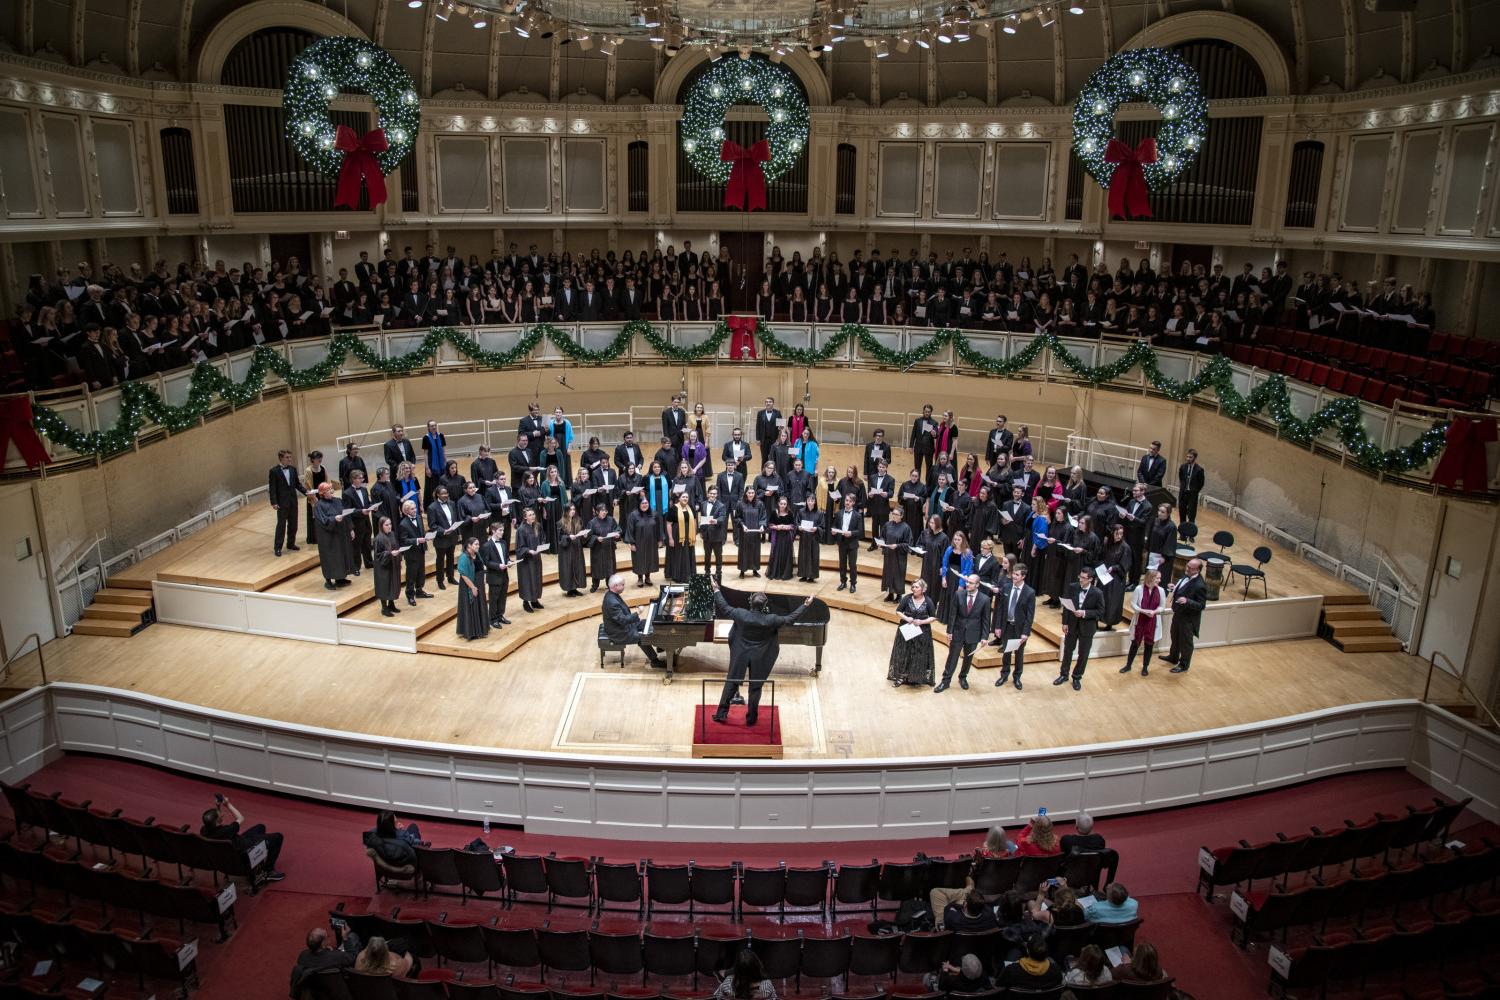 The <a href='http://534.hwanfei.com'>bv伟德ios下载</a> Choir performs in the Chicago Symphony Hall.